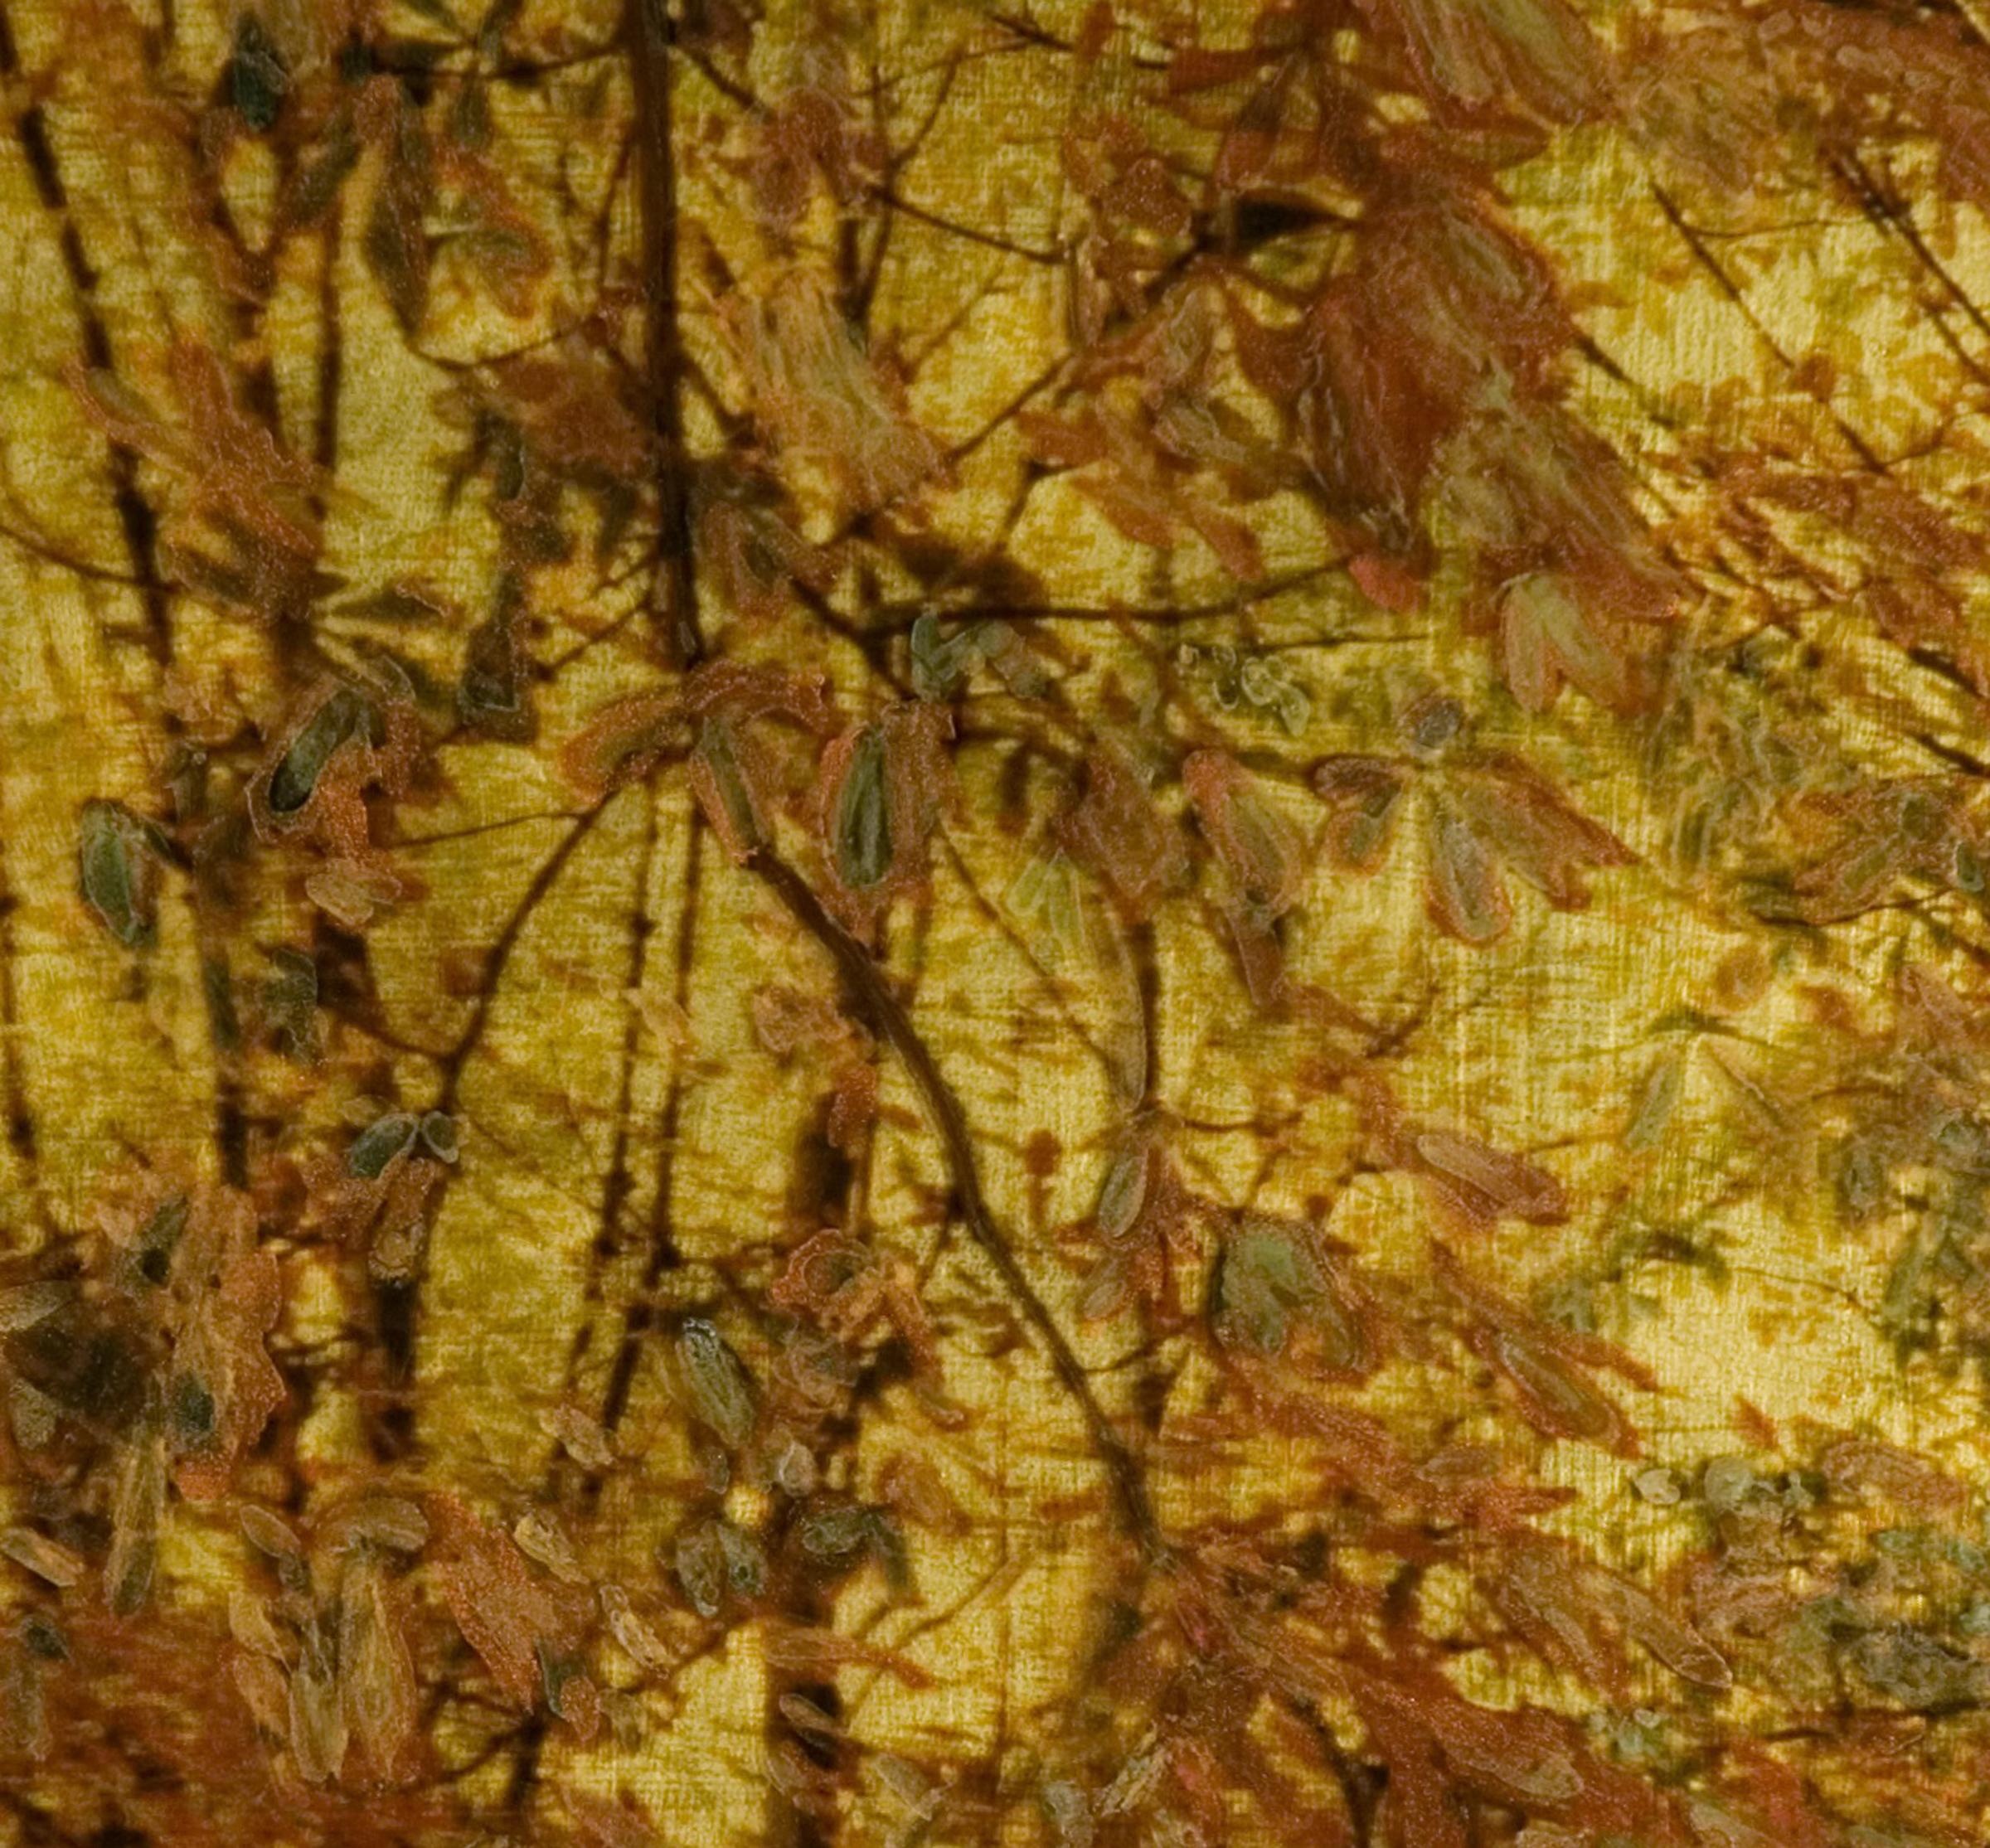 NO. 165, depiction of trees, nature, gold, brown, branches of tree, leaves - Contemporary Mixed Media Art by Susan Goldsmith